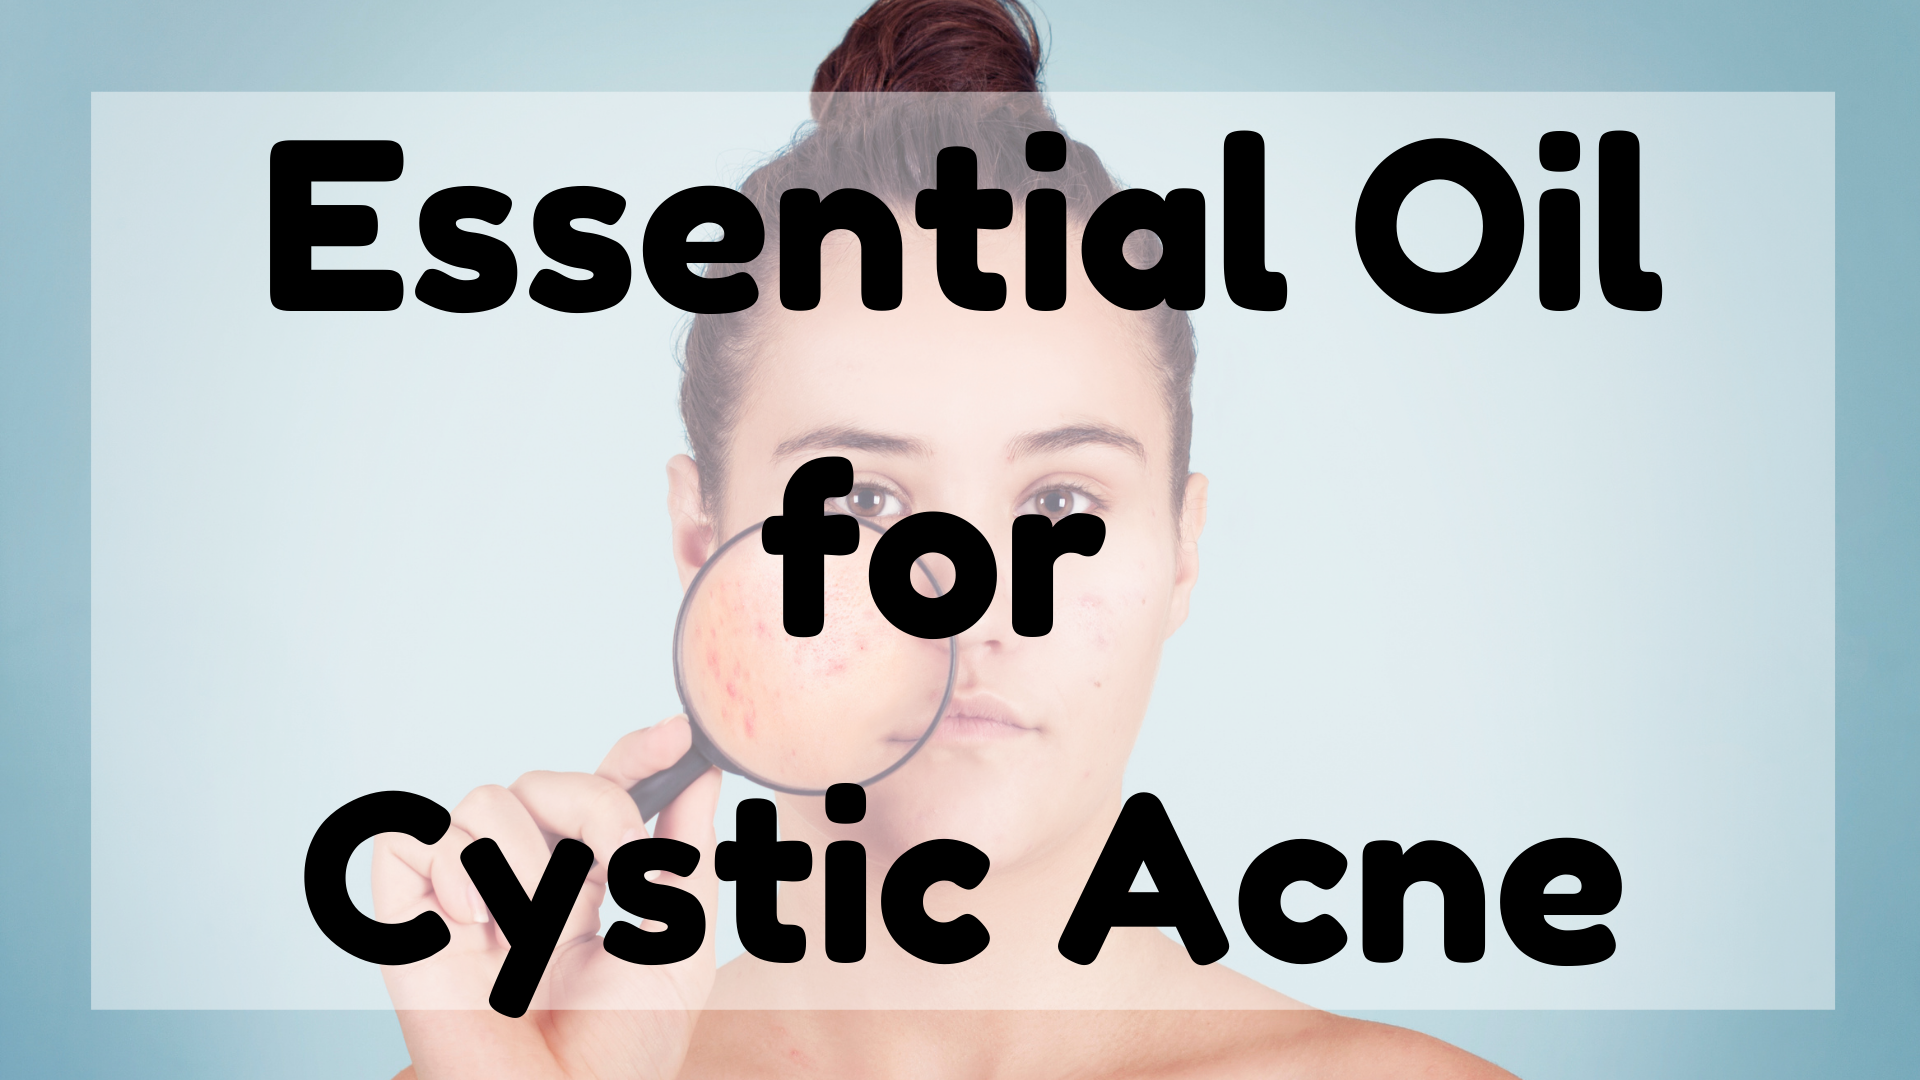 Essential Oil For Cystic Acne